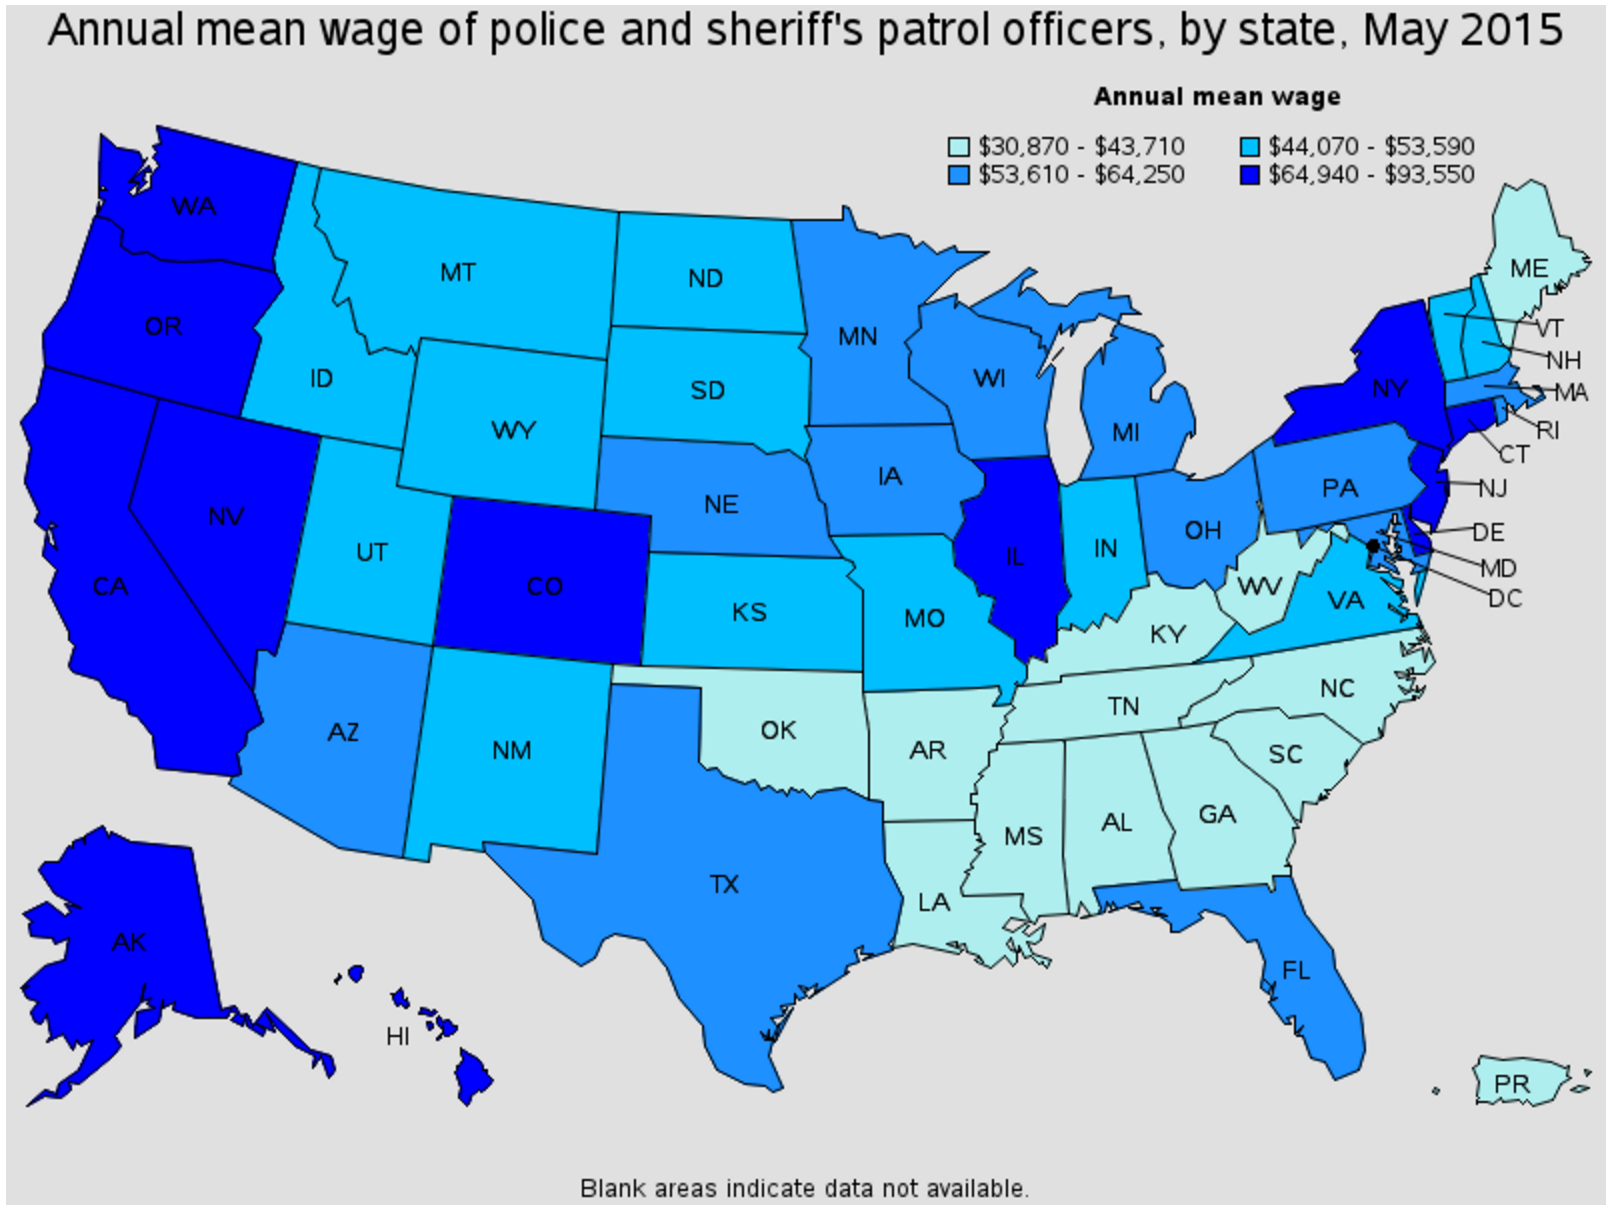 College Station police officer average salary by state